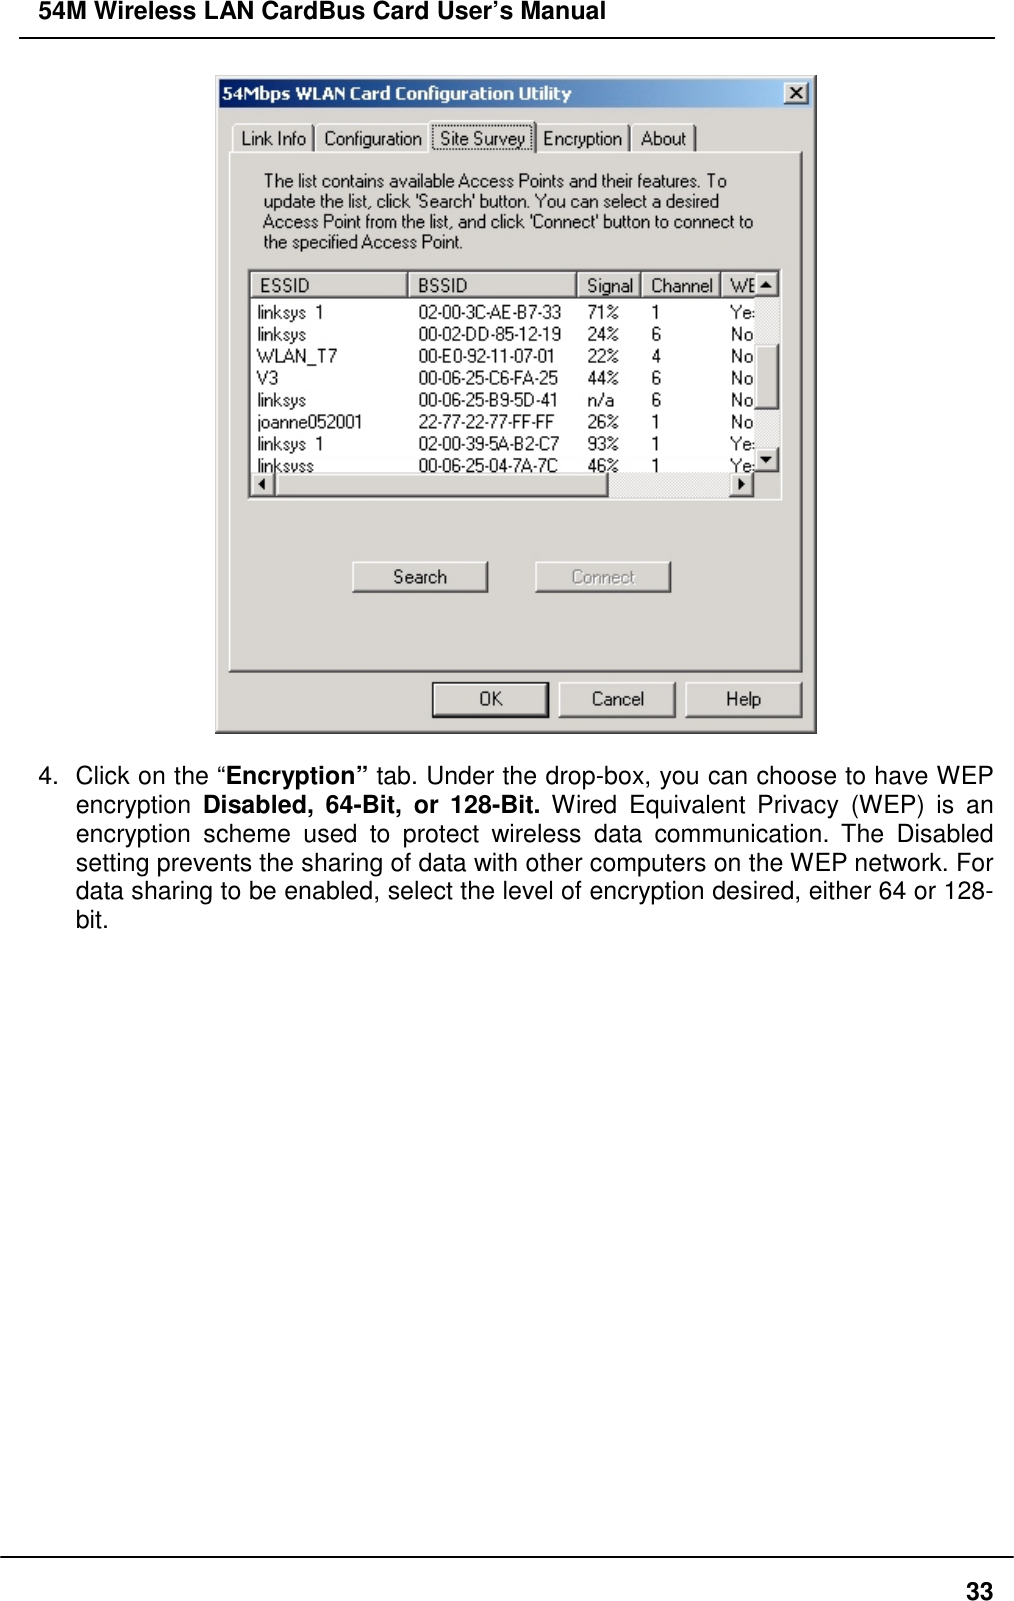 54M Wireless LAN CardBus Card User’s Manual334.  Click on the “Encryption” tab. Under the drop-box, you can choose to have WEPencryption  Disabled, 64-Bit, or 128-Bit. Wired Equivalent Privacy (WEP) is anencryption scheme used to protect wireless data communication. The Disabledsetting prevents the sharing of data with other computers on the WEP network. Fordata sharing to be enabled, select the level of encryption desired, either 64 or 128-bit.